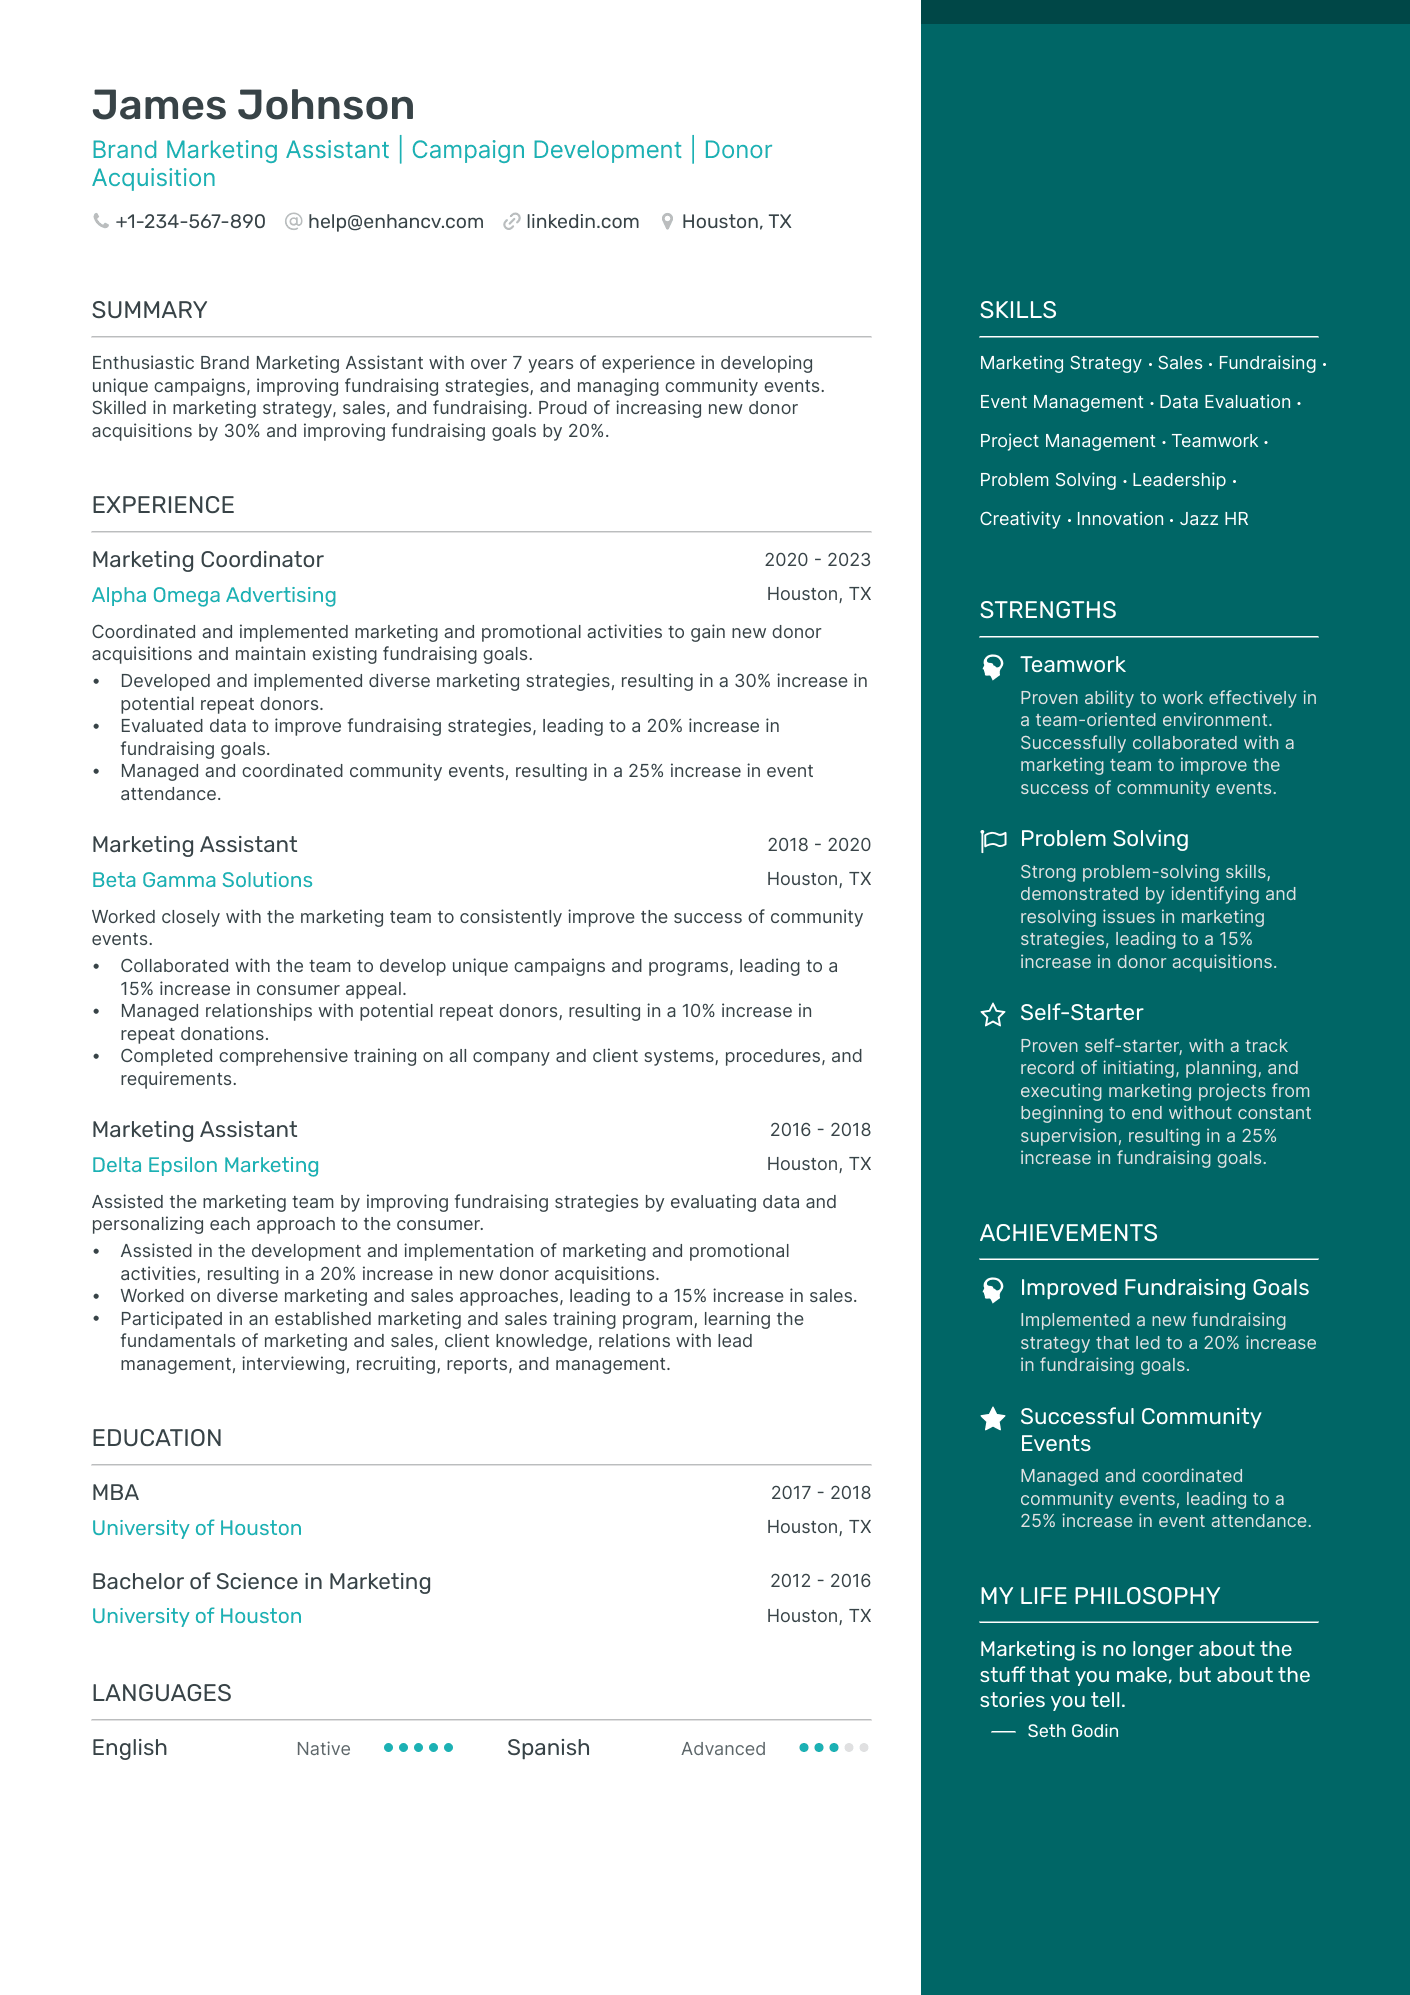 Marketing Assistant resume example